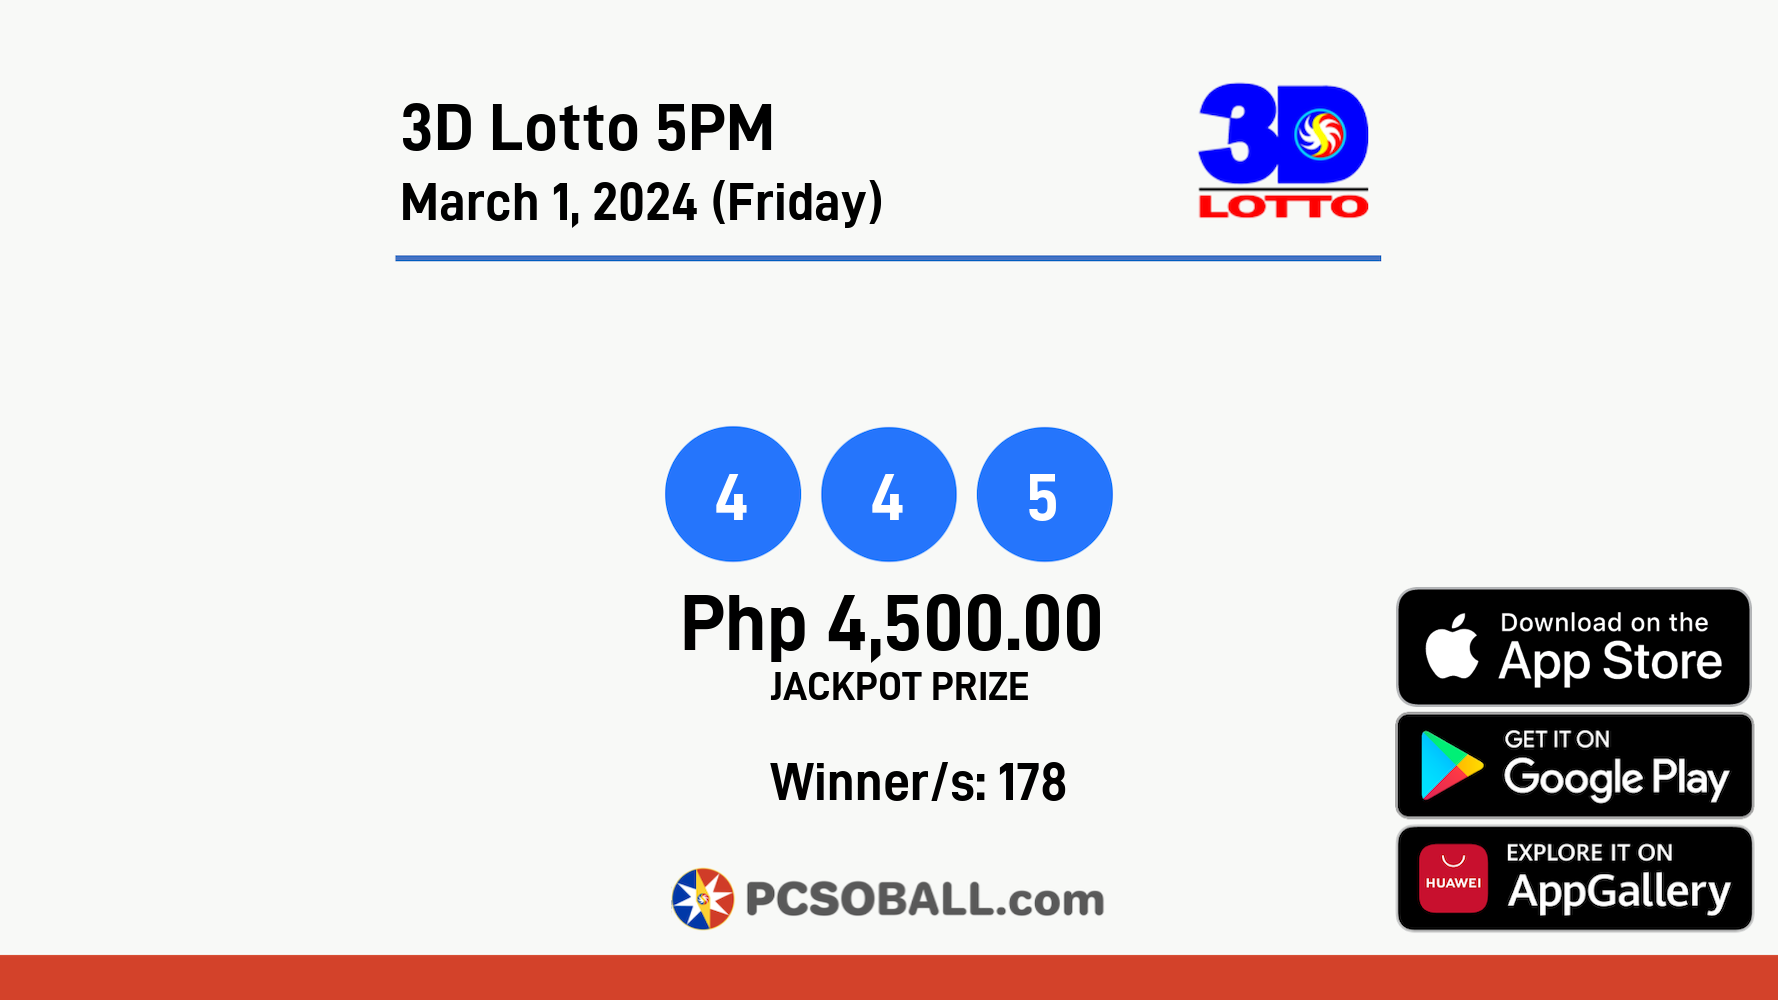 3D Lotto 5PM March 1, 2024 (Friday) Result